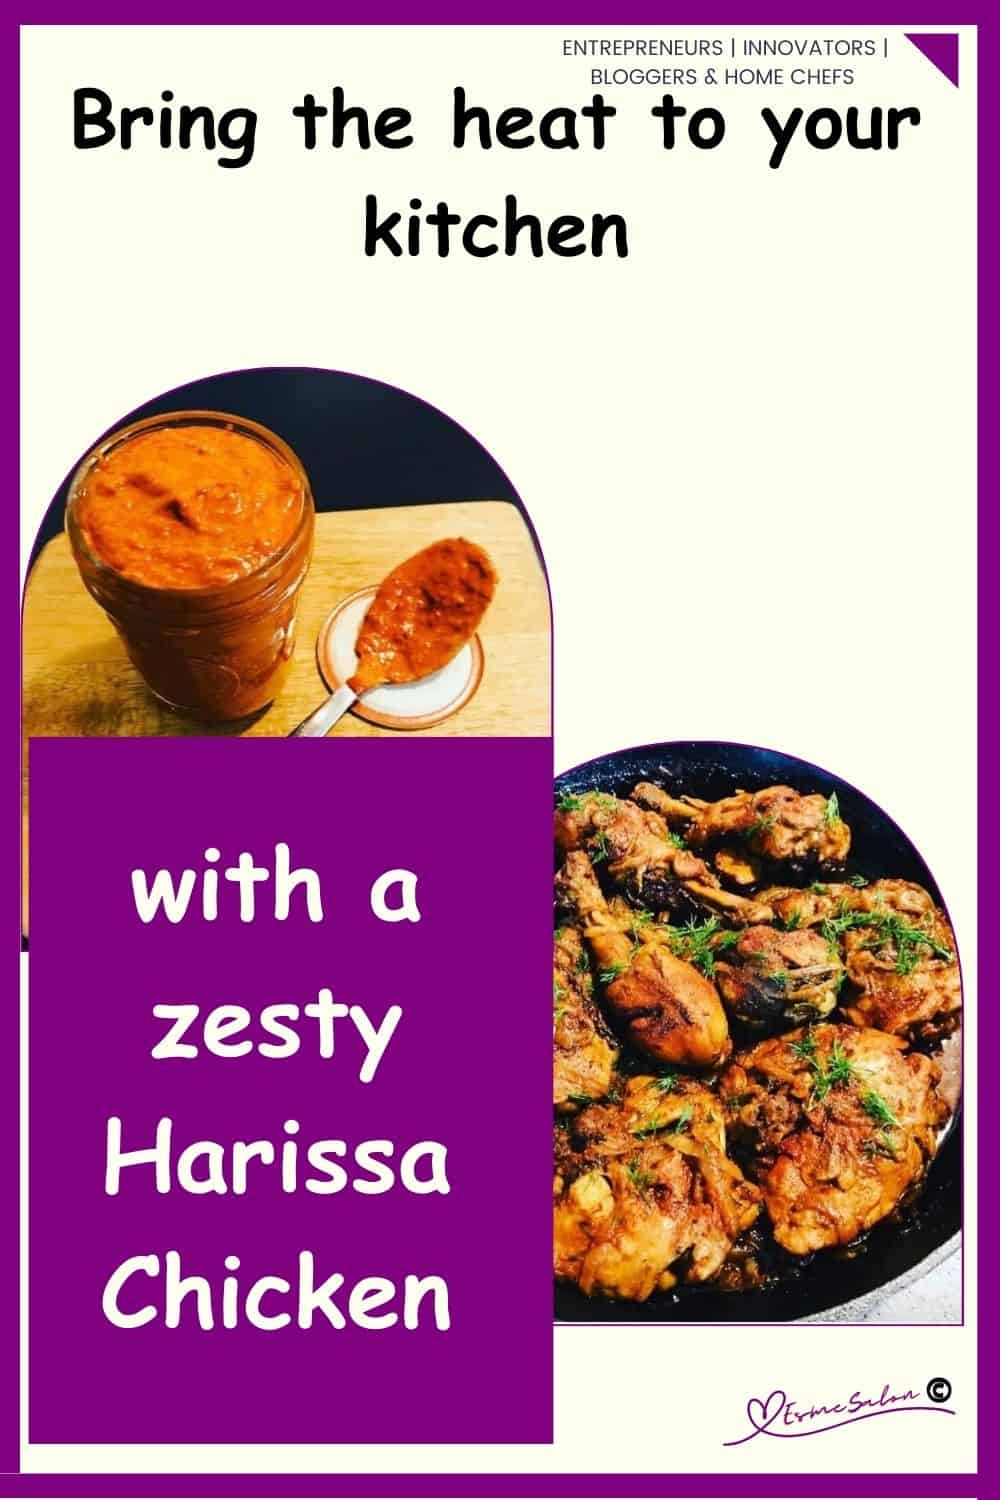 an image of a bottle of Harissa Paste as well as Chicken covered with Harissa Paste and a Couscous Salad!